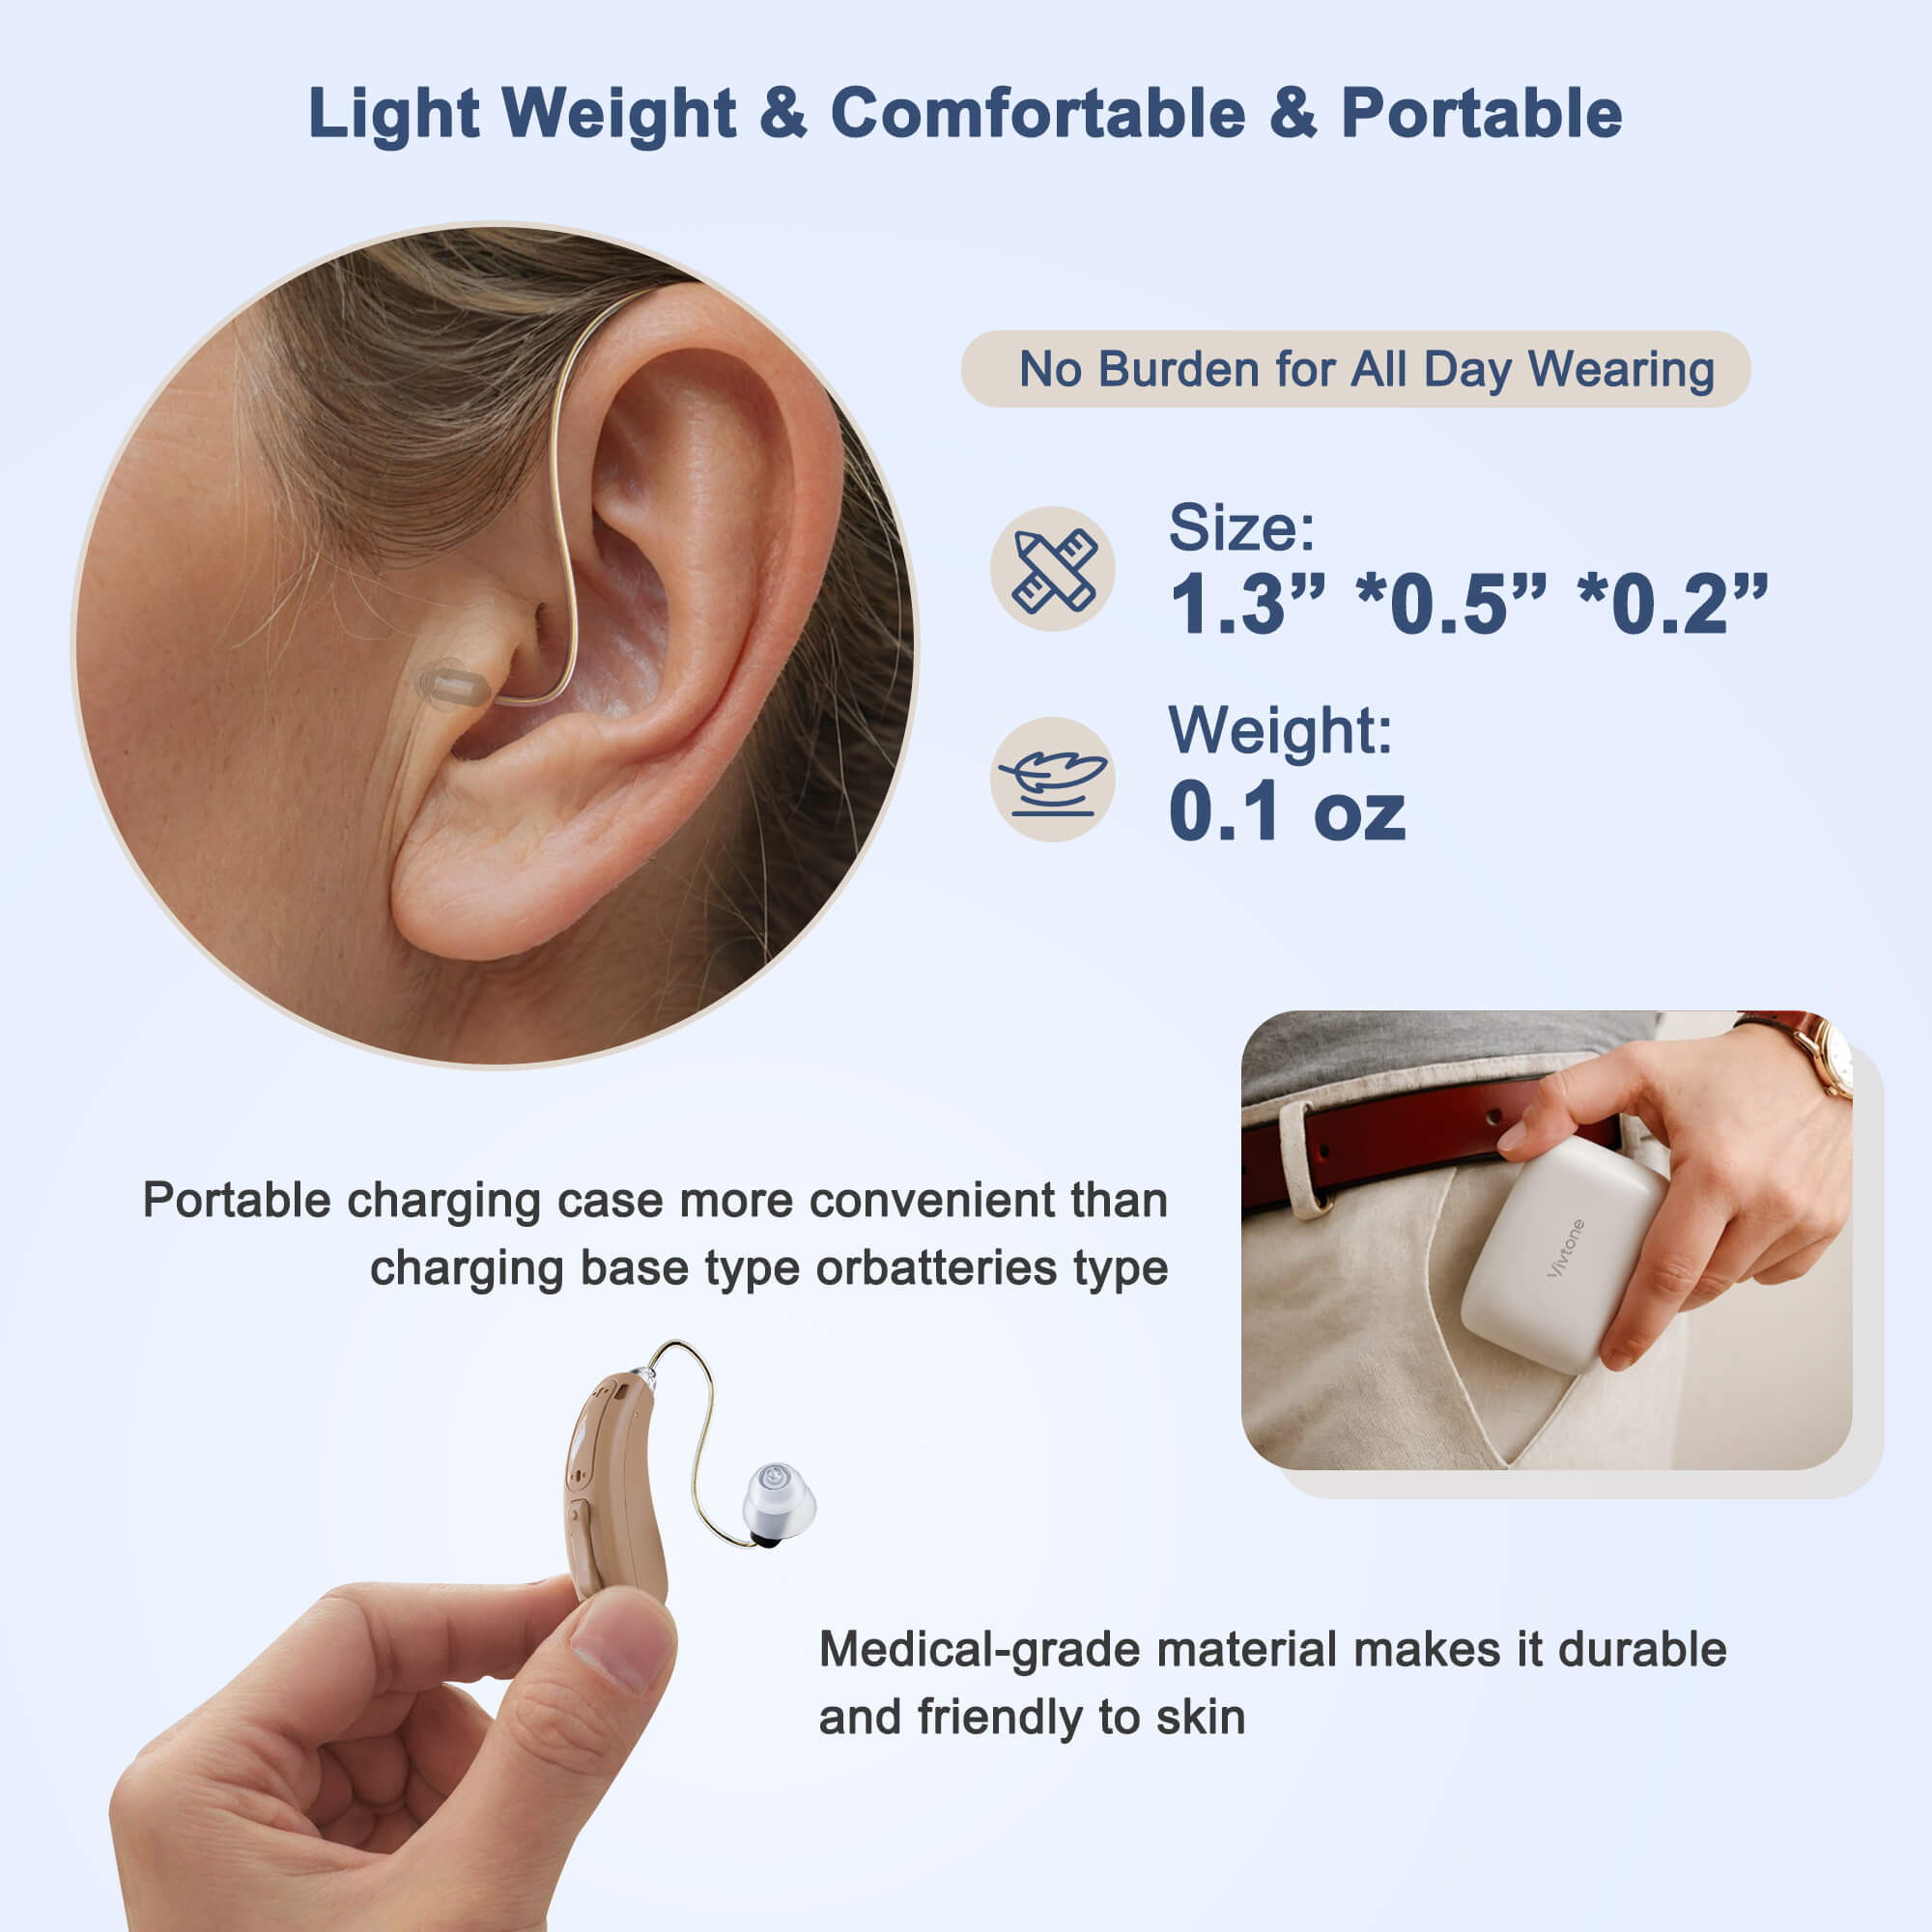 7. vivtone lucid516 ric hearing aids-light weight and comfortable